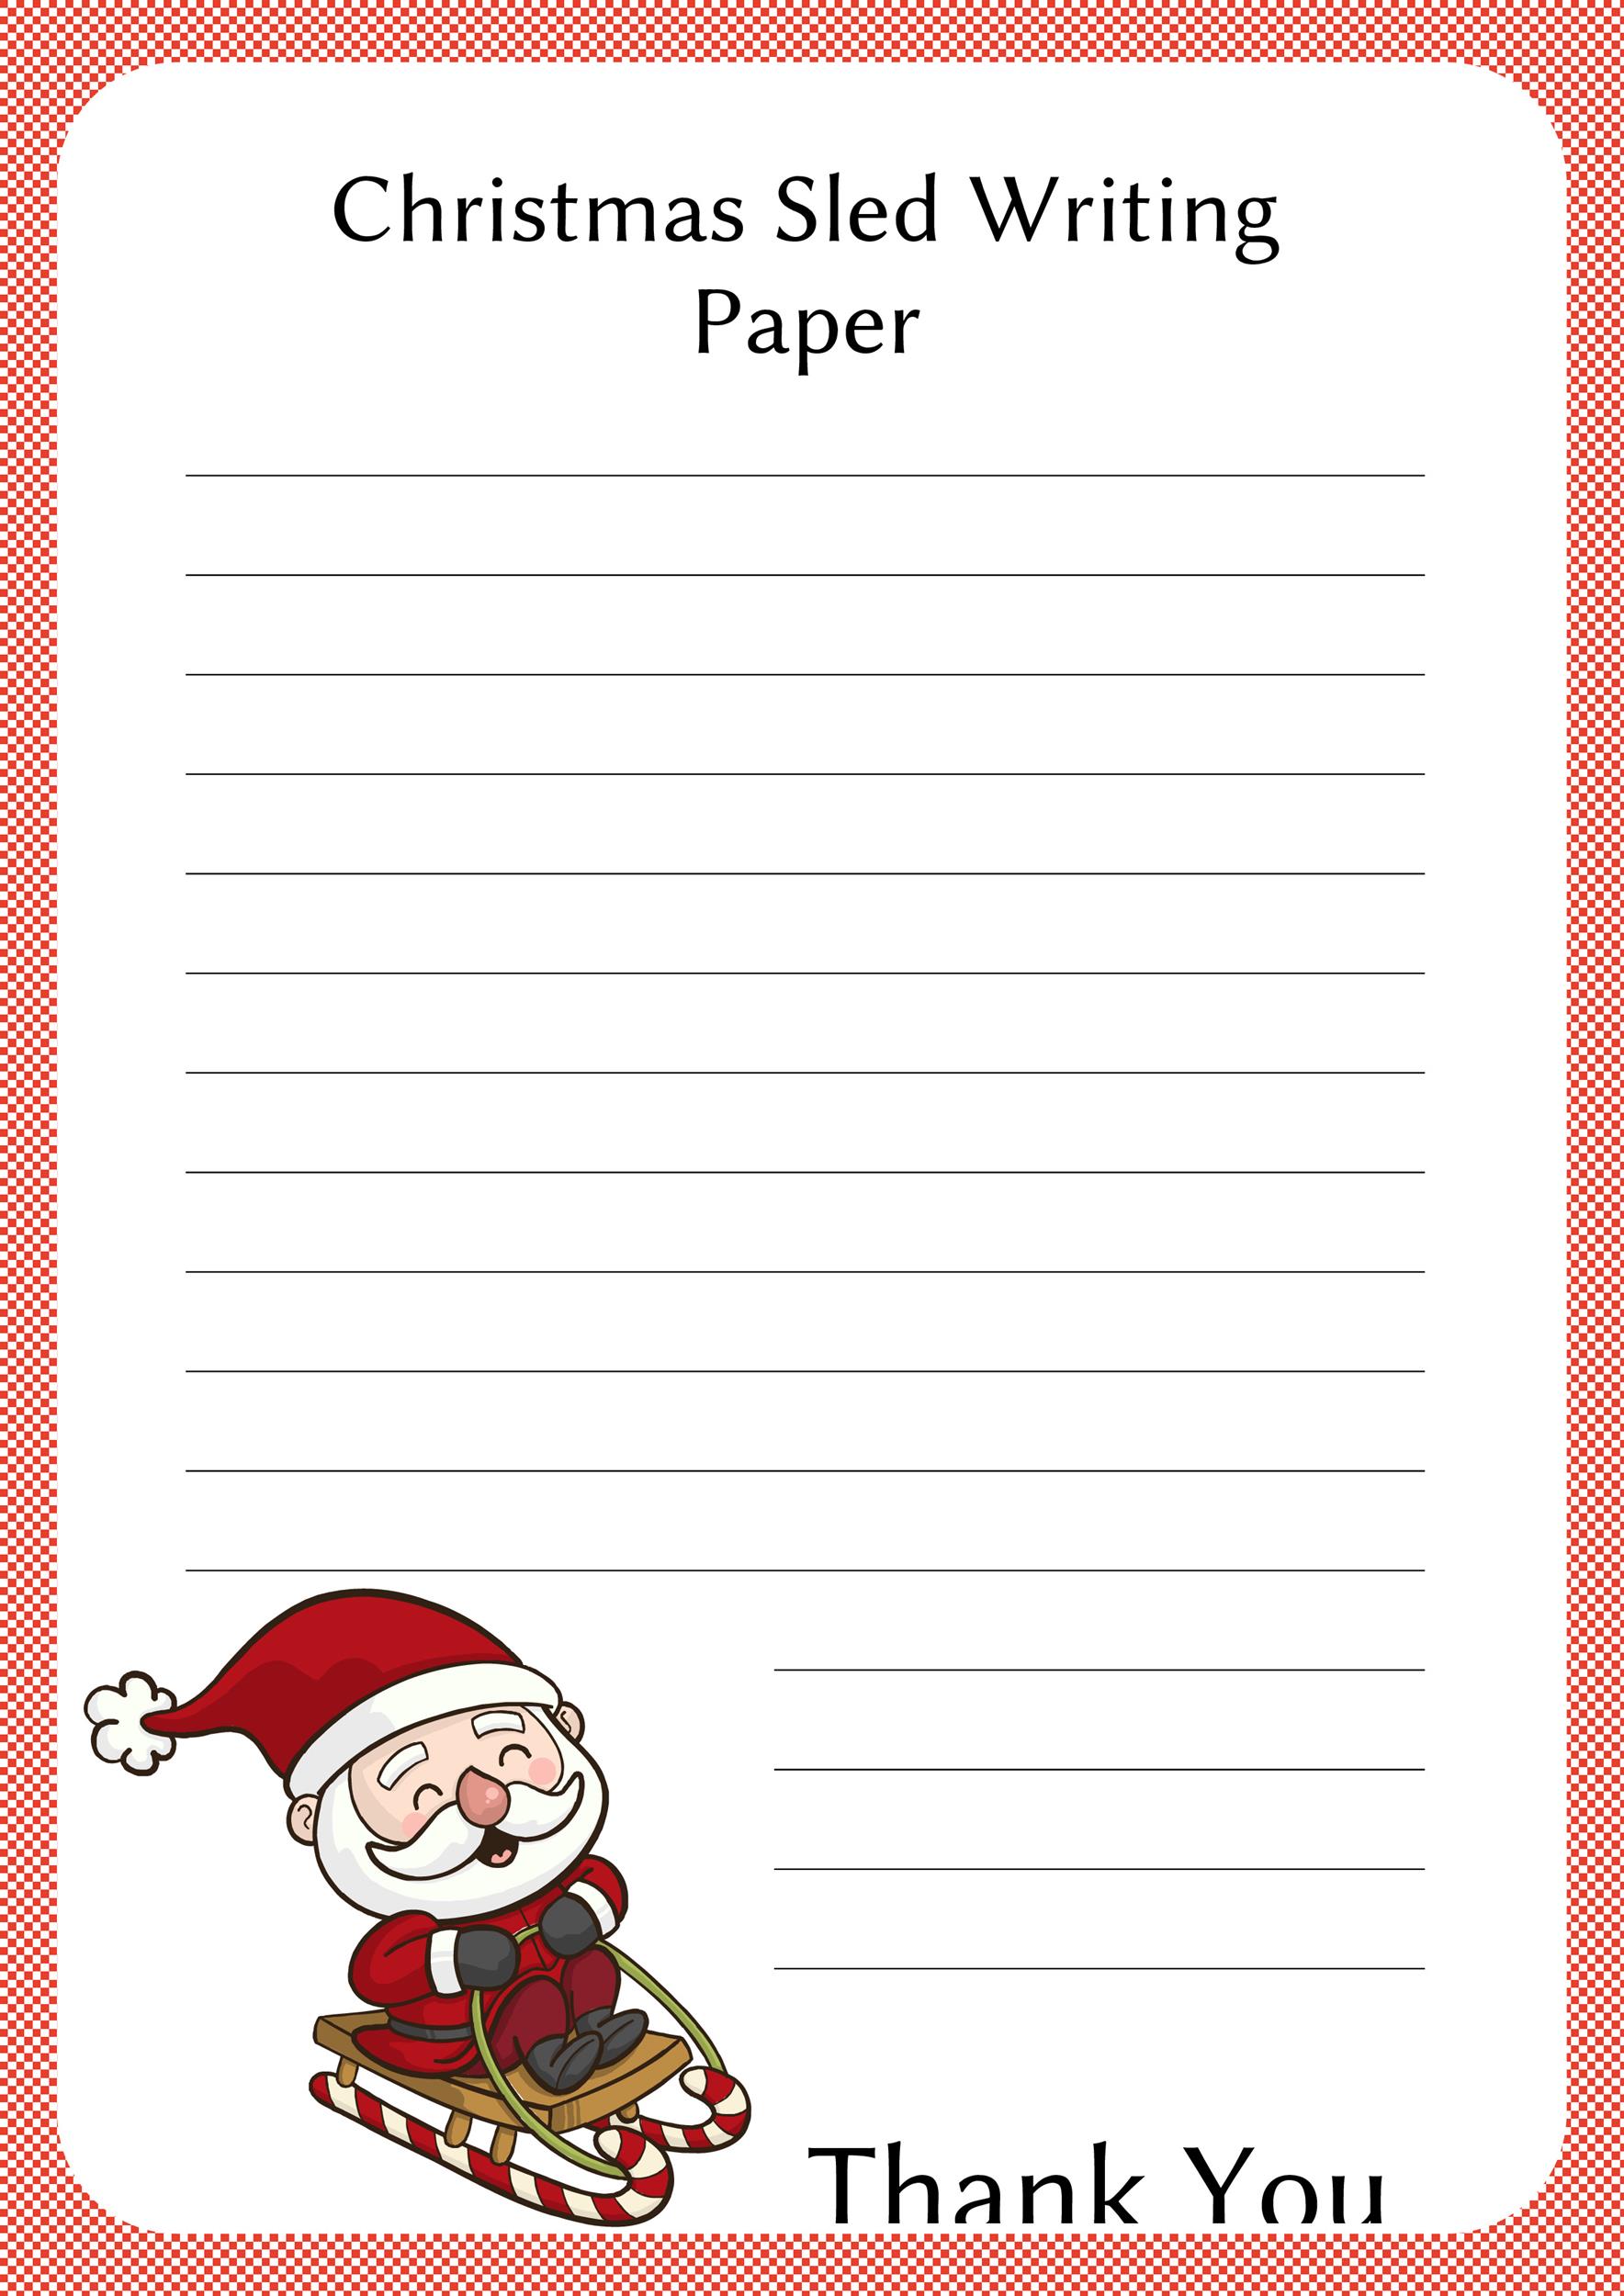 25 x A4 Sheets 8 Designs Christmas Writing Paper 